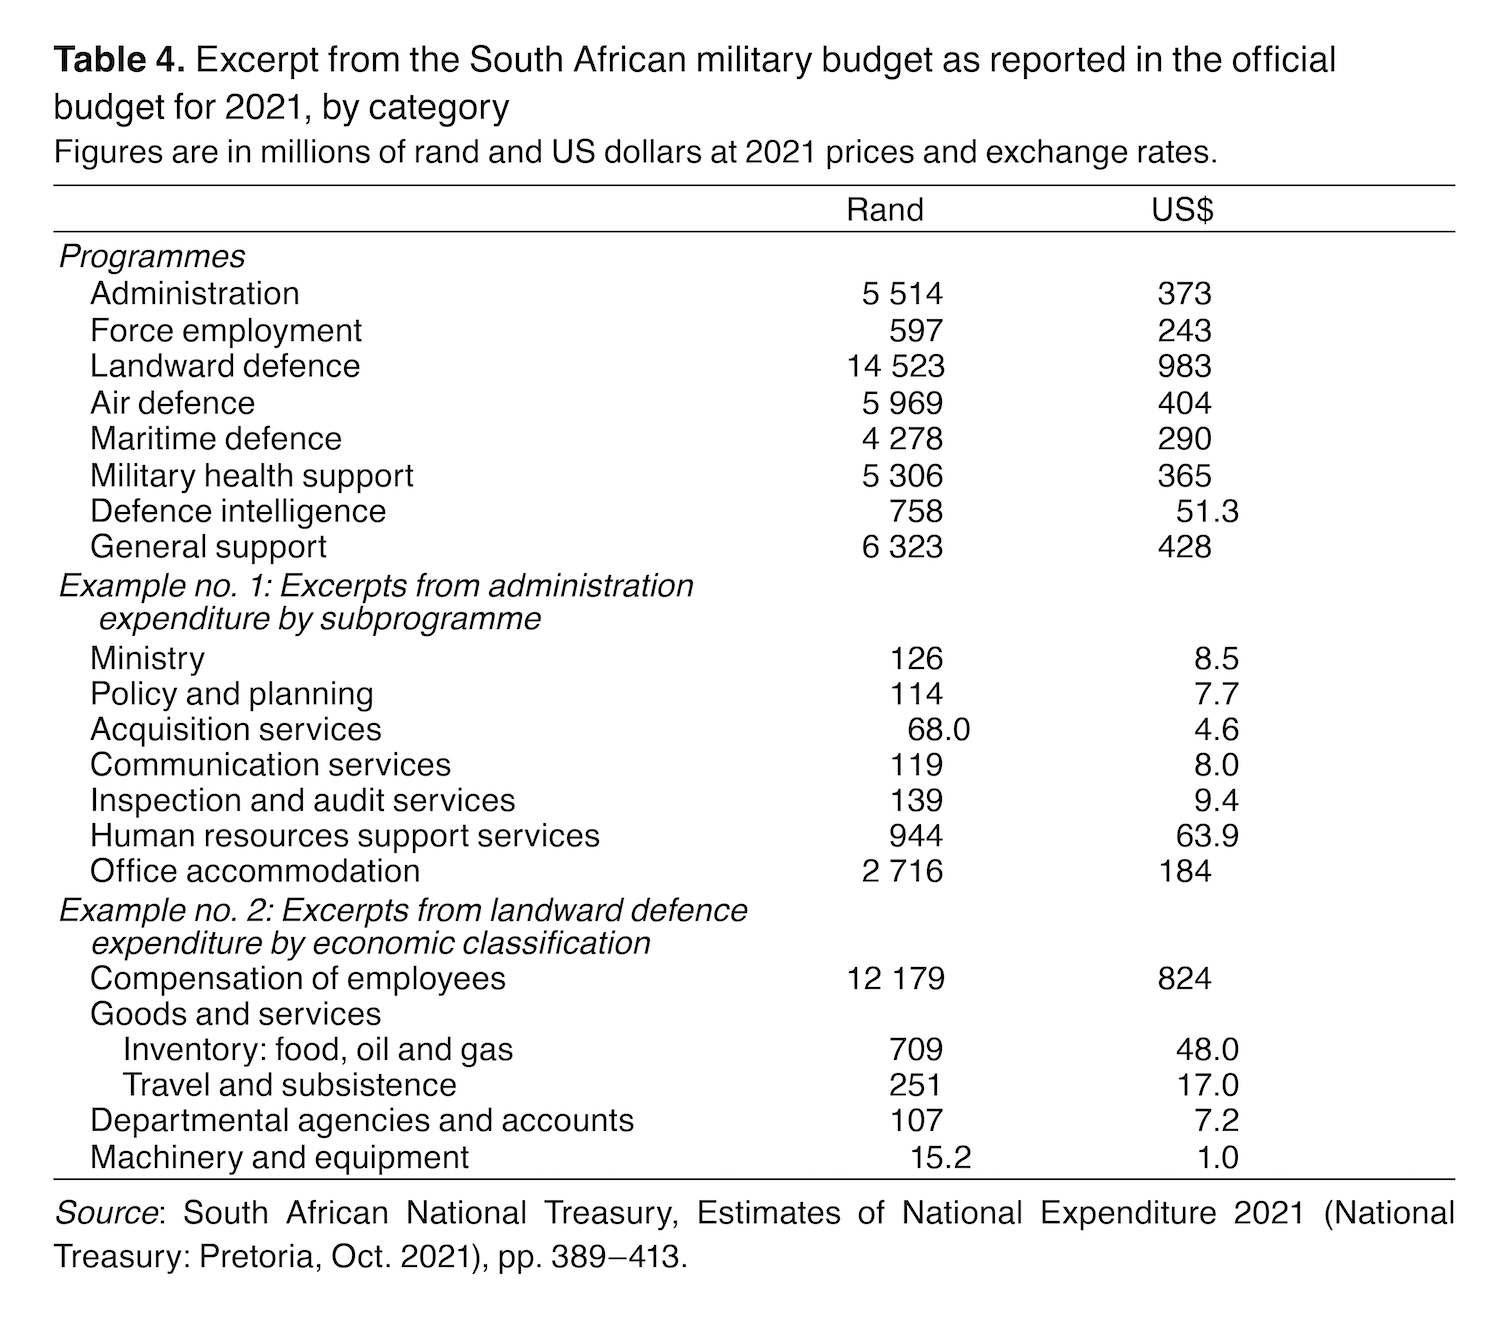 Table 4. Excerpt from the South African military budget as reported in the official budget for 2021, by category